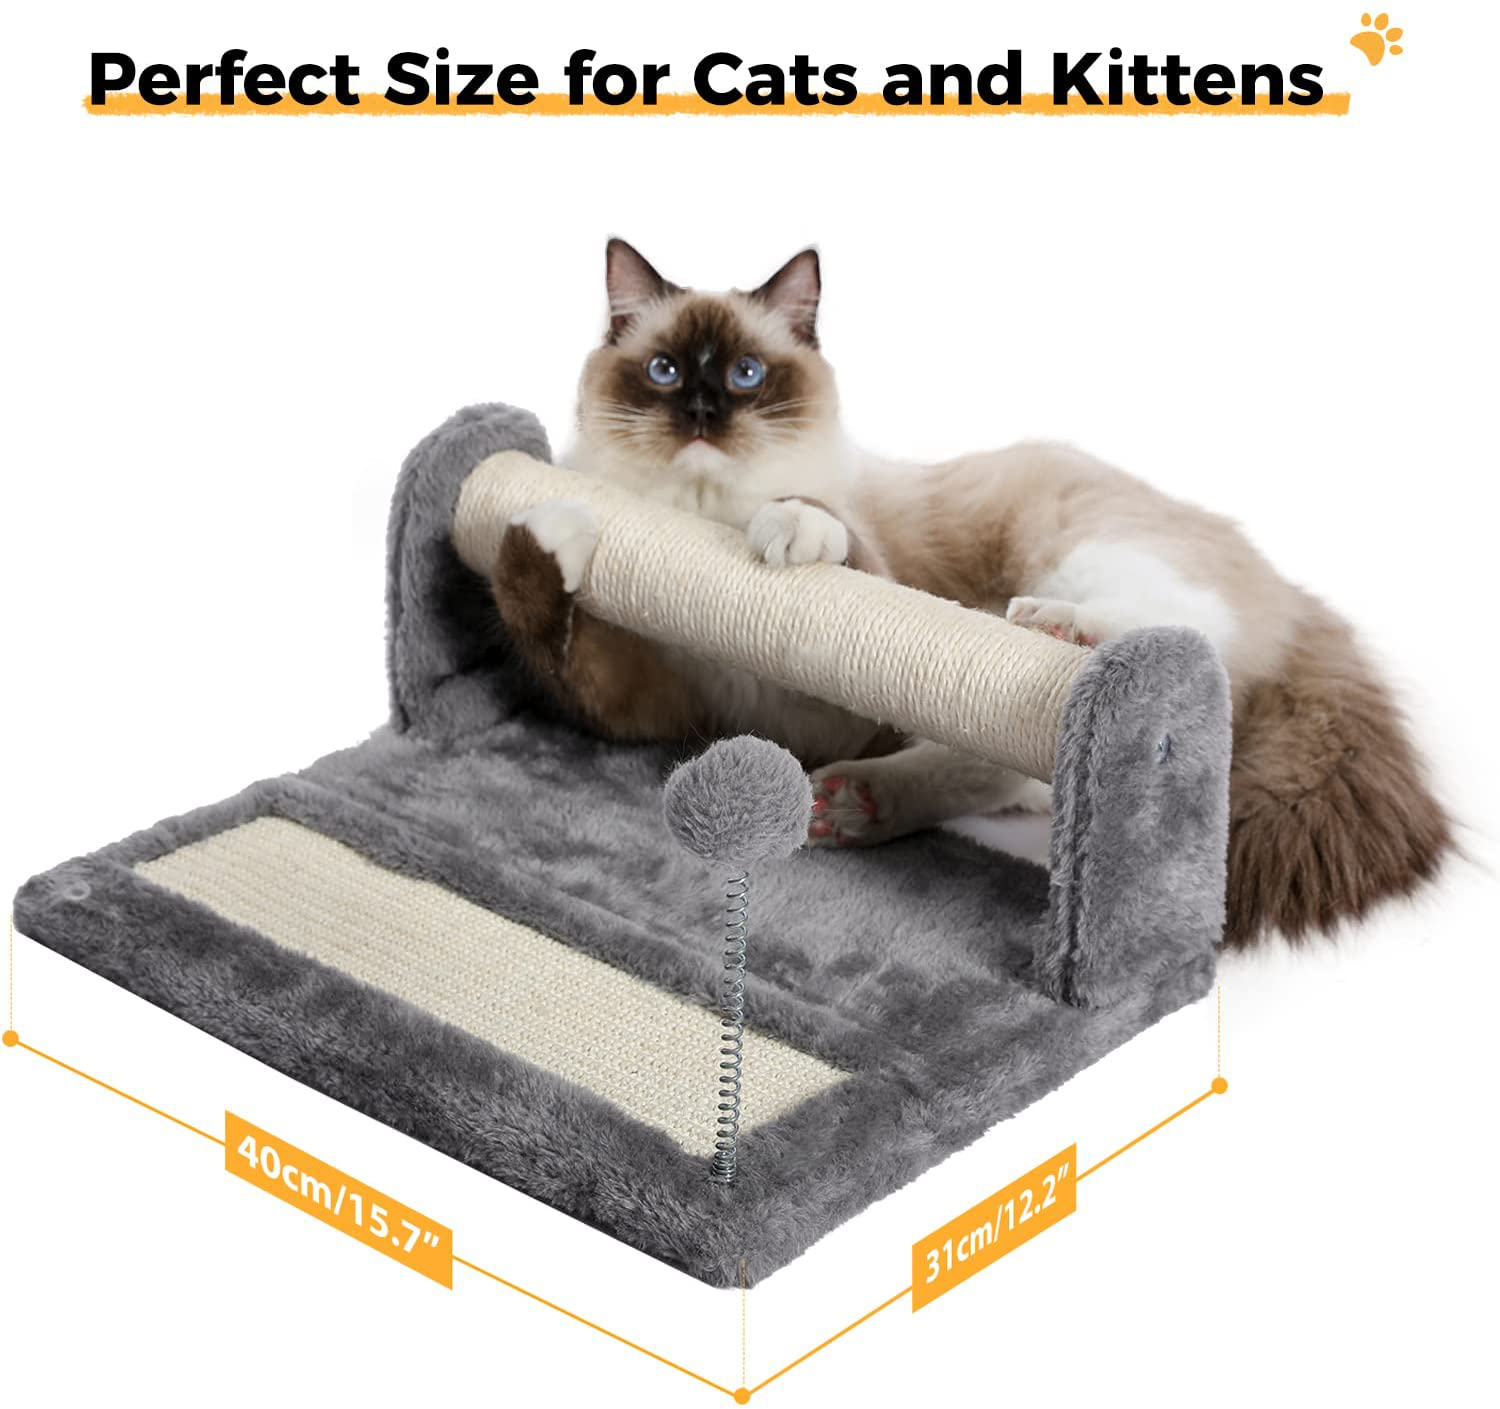 PAWZ Road Cat Scratching Post and Pad, Featuring with Soft Perch Sisal-Covered Scratch Posts and Pads with Play Ball Great for Kittens and Cats